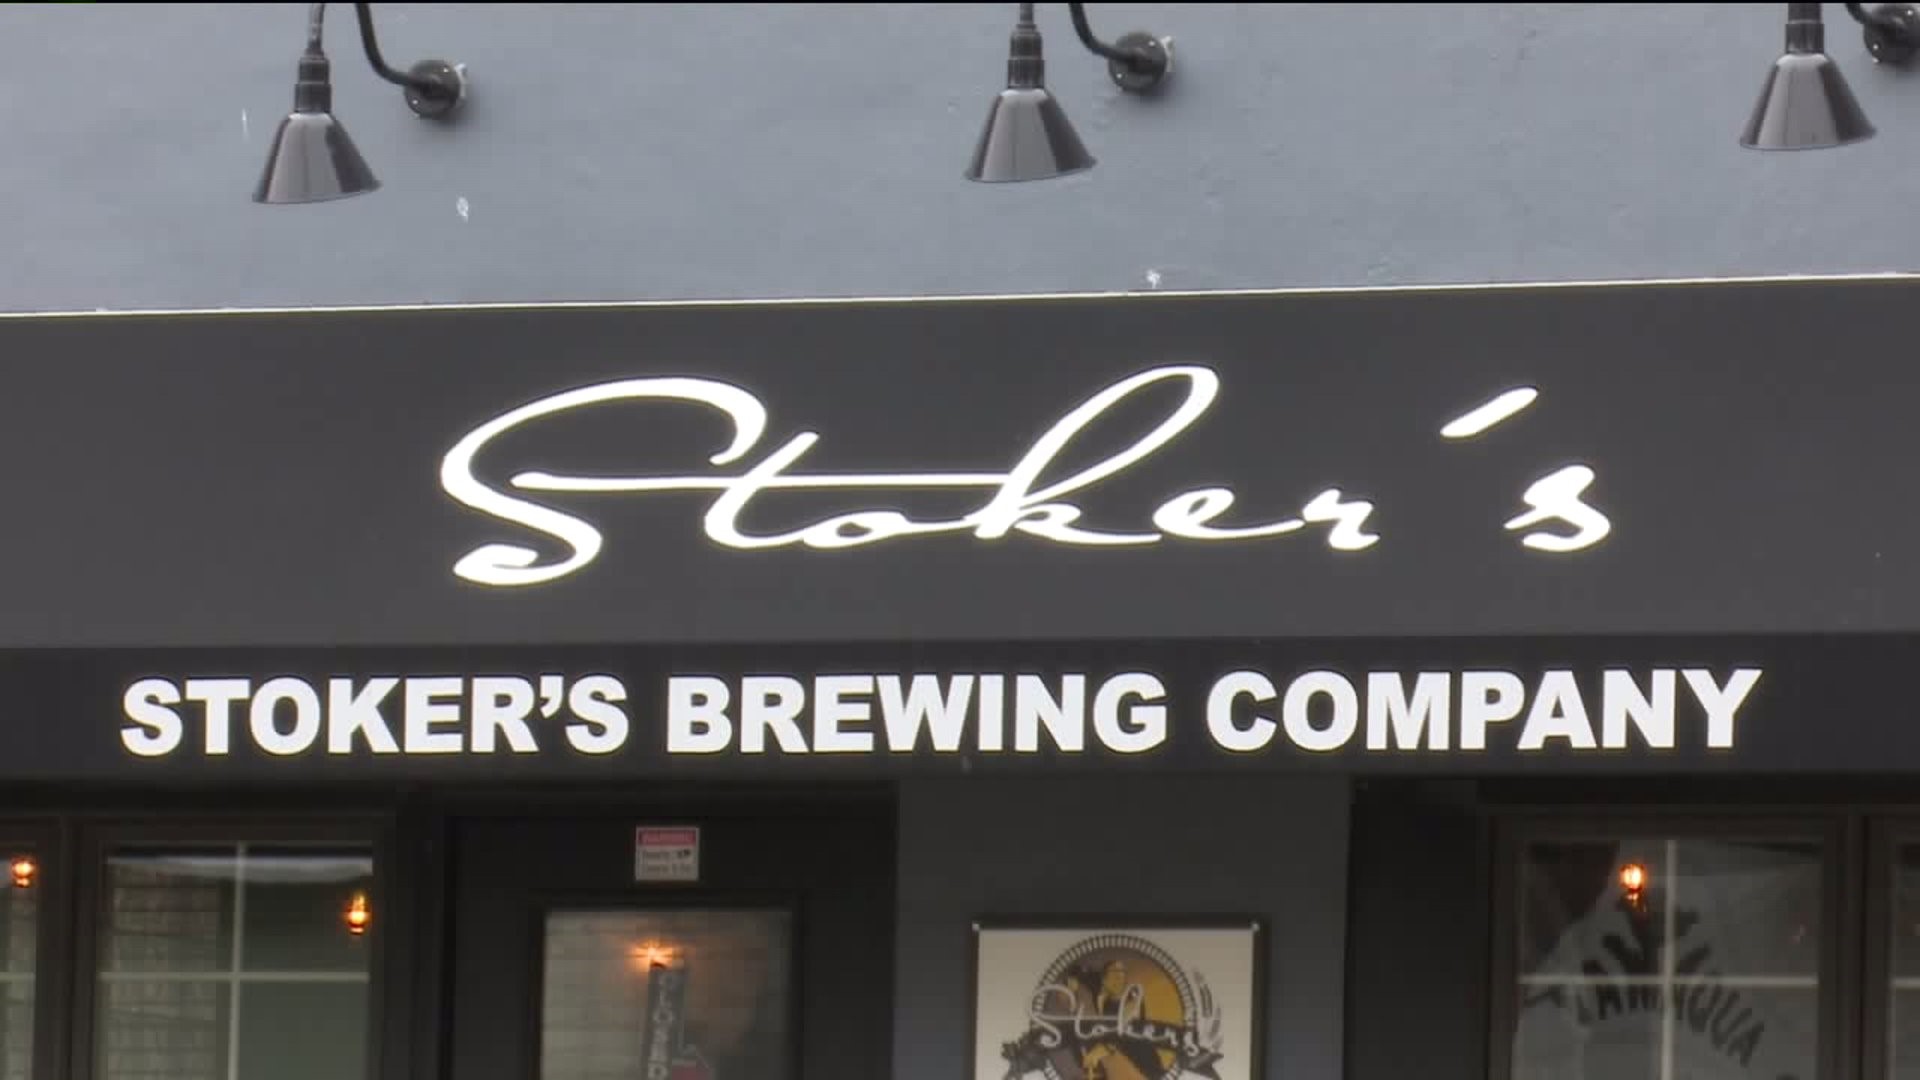 Stoker's Brewing Company: A New Taste in Tamaqua